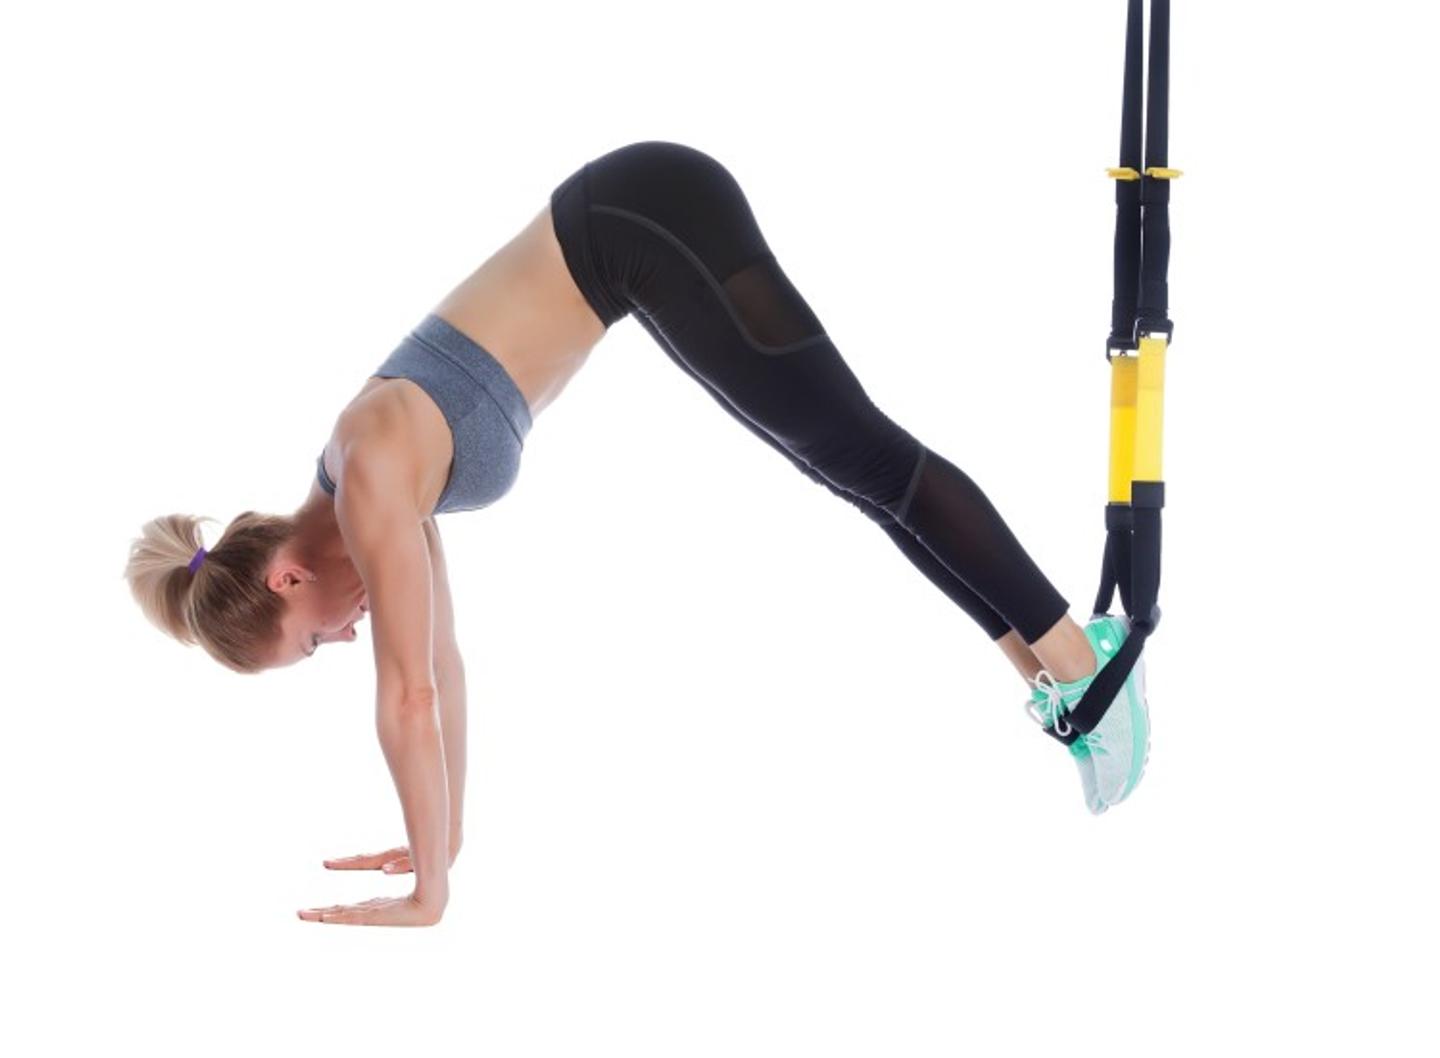 ISSA, International Sports Sciences Association, Certified Personal Trainer, ISSAonline, ISSA x TRX: Best TRX Exercises to Enhance Your Training Pikes